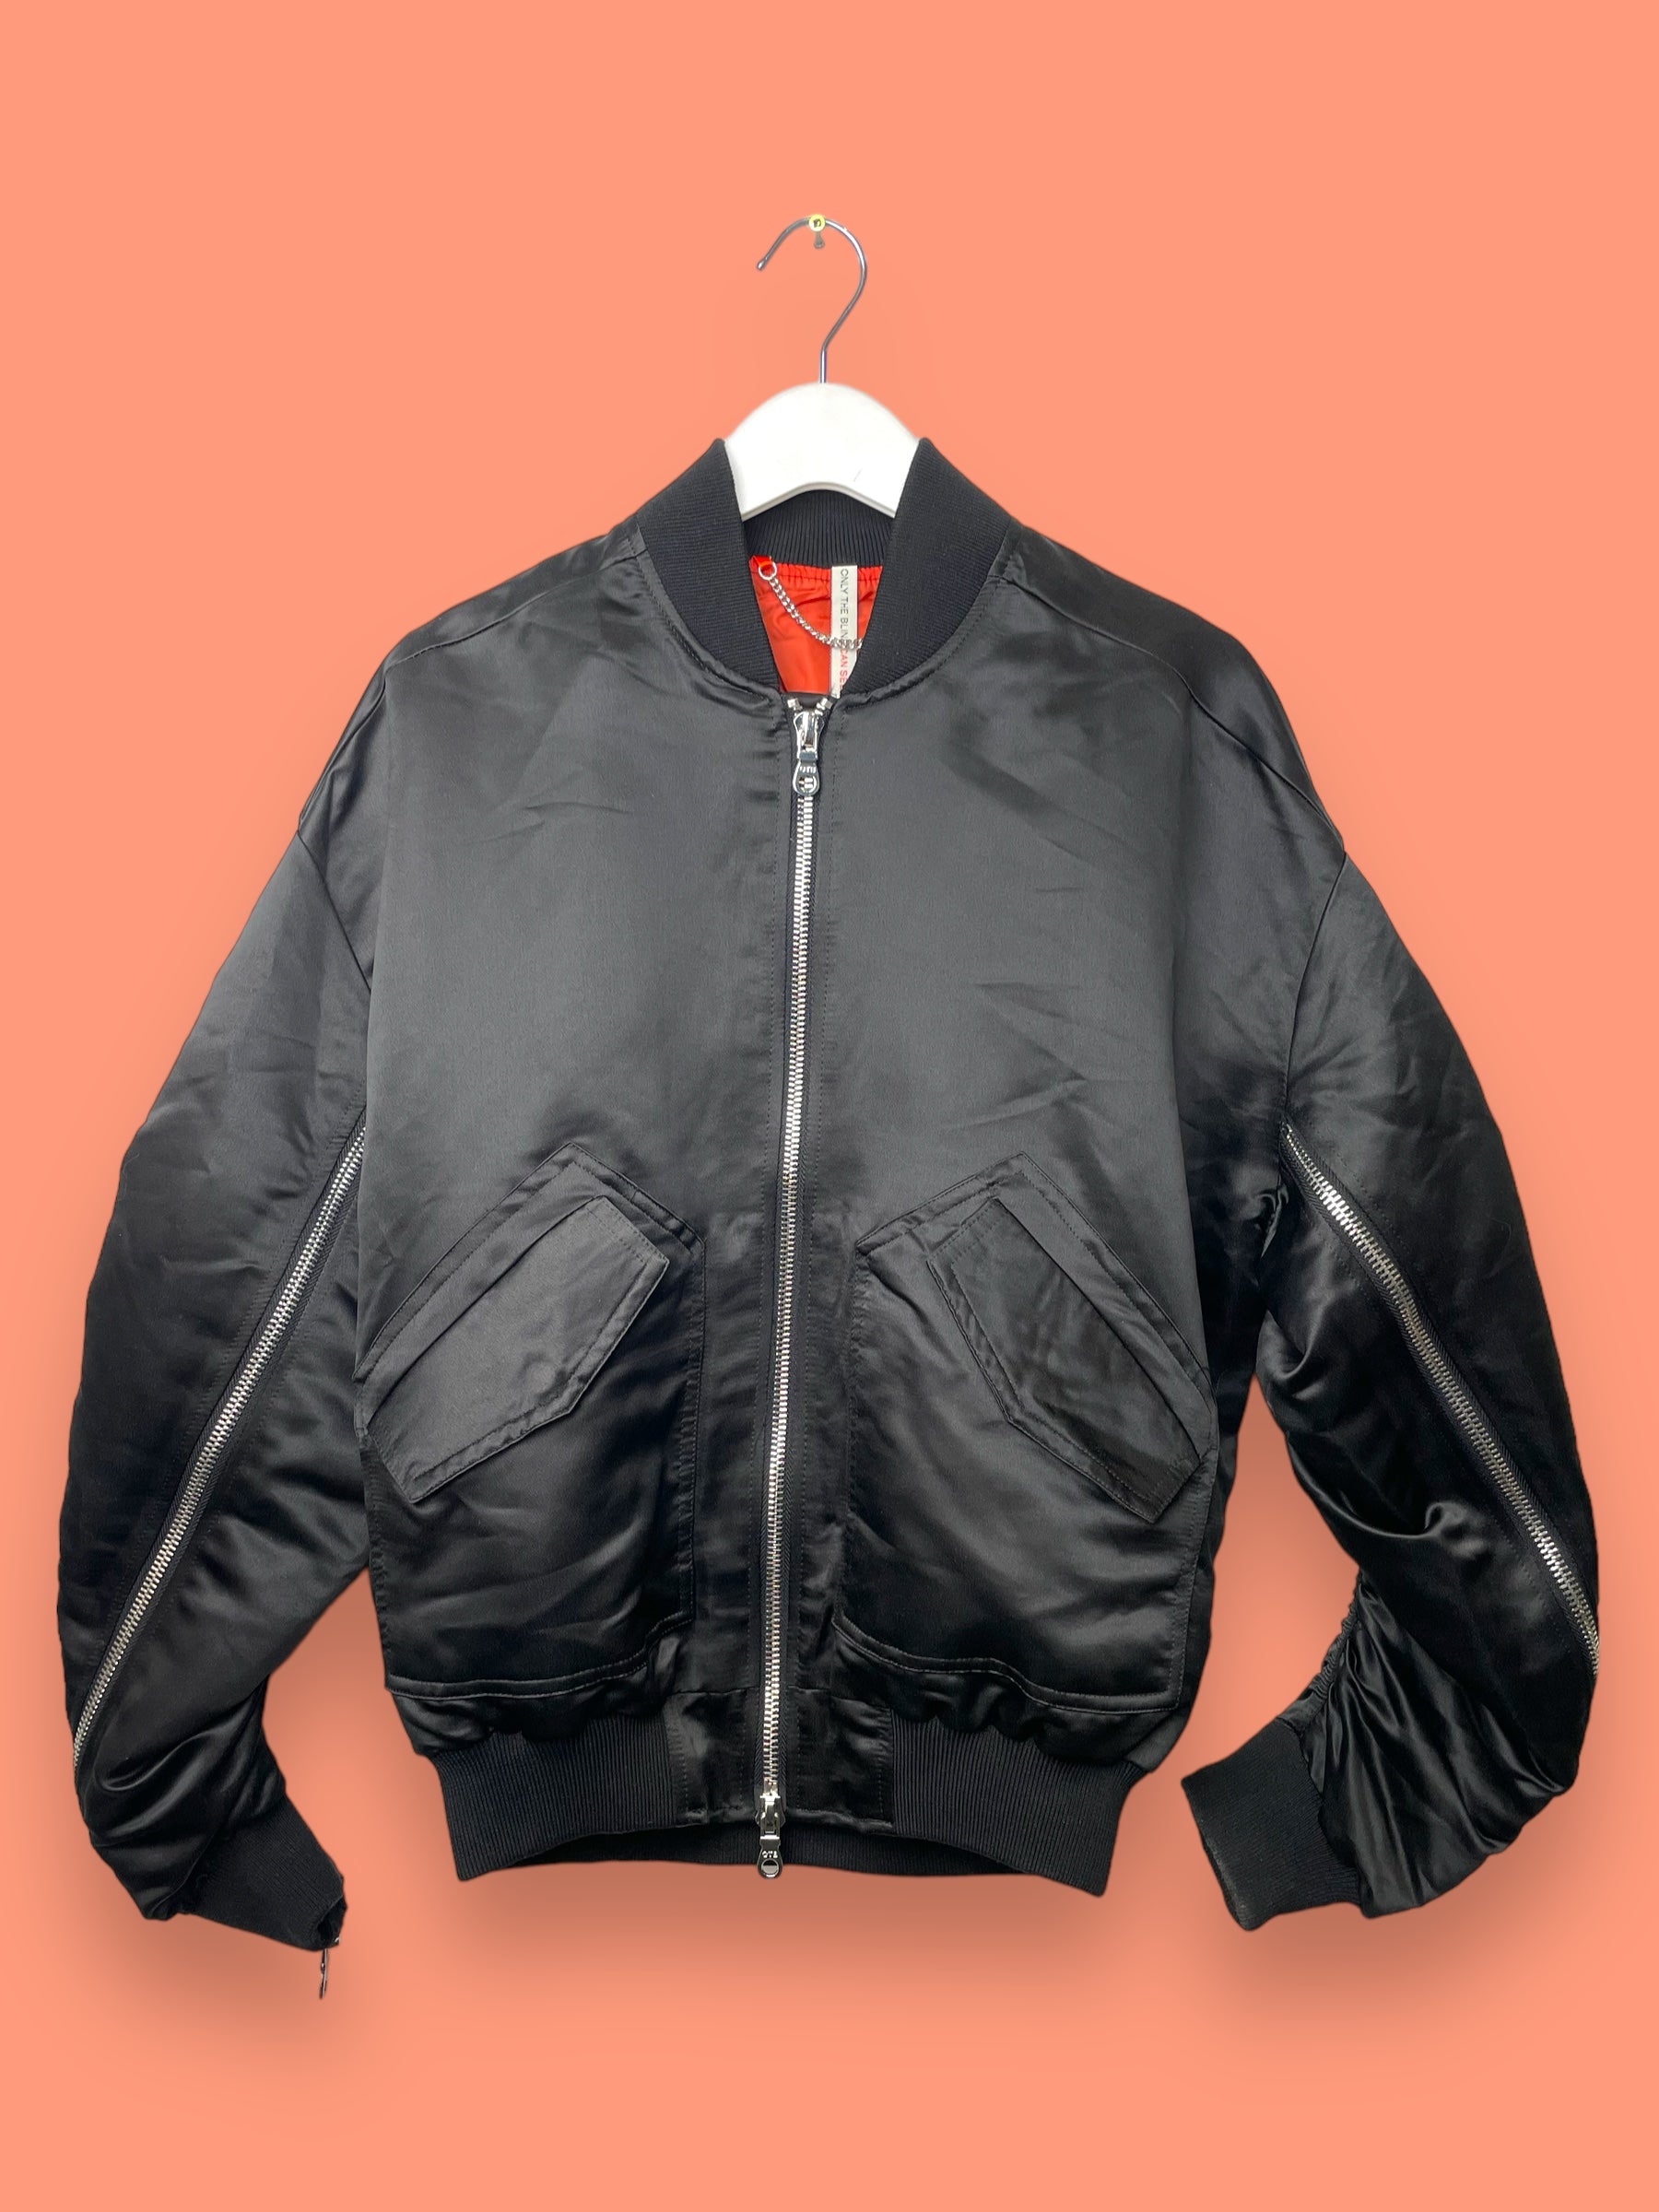 Only the Blind's Signature "Satin" Jacket